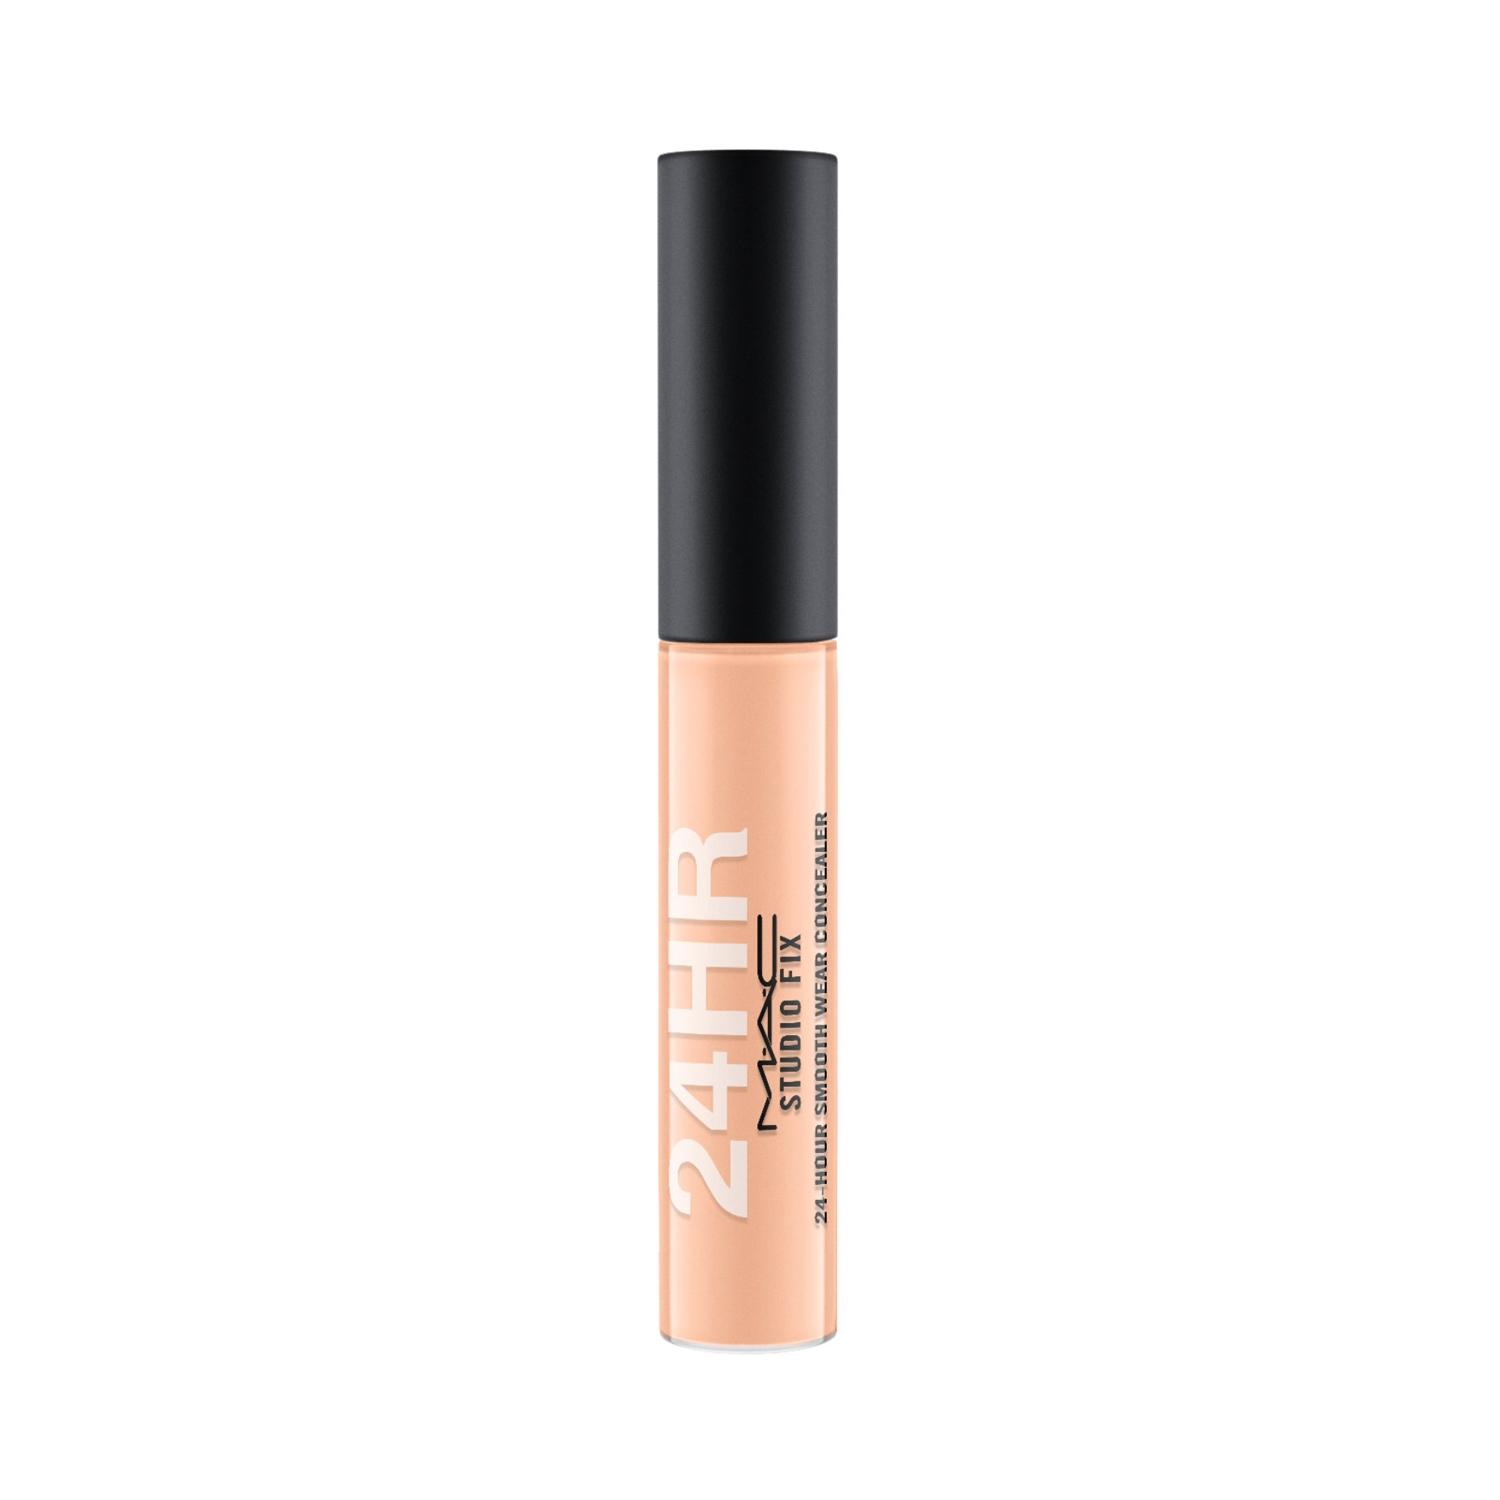 m.a.c studio fix 24-hour smooth wear concealer - nw32 (7ml)